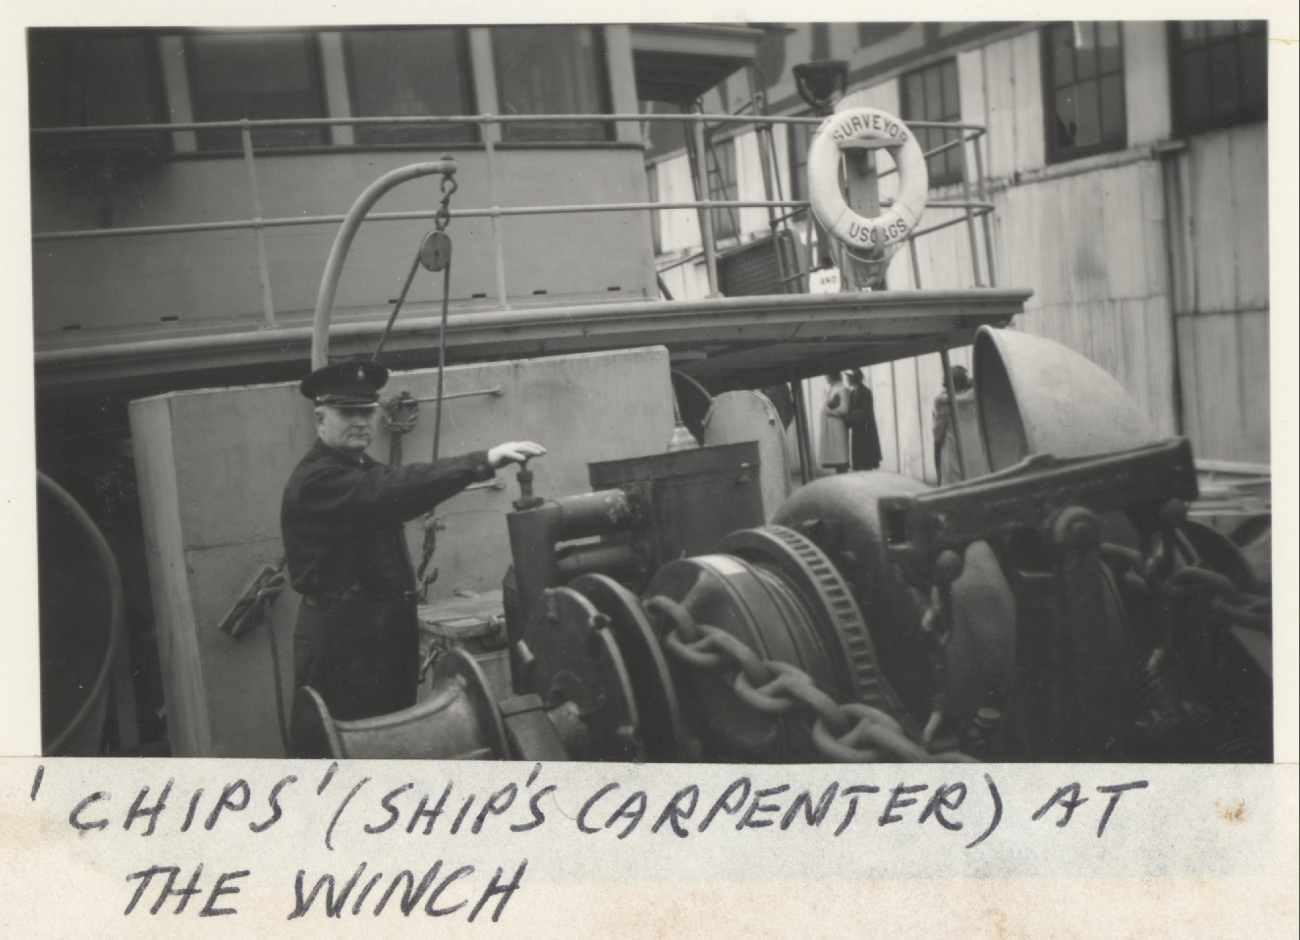 Chips, the ubiquitous name for a ship's carpenter, on the winch of theSURVEYOR